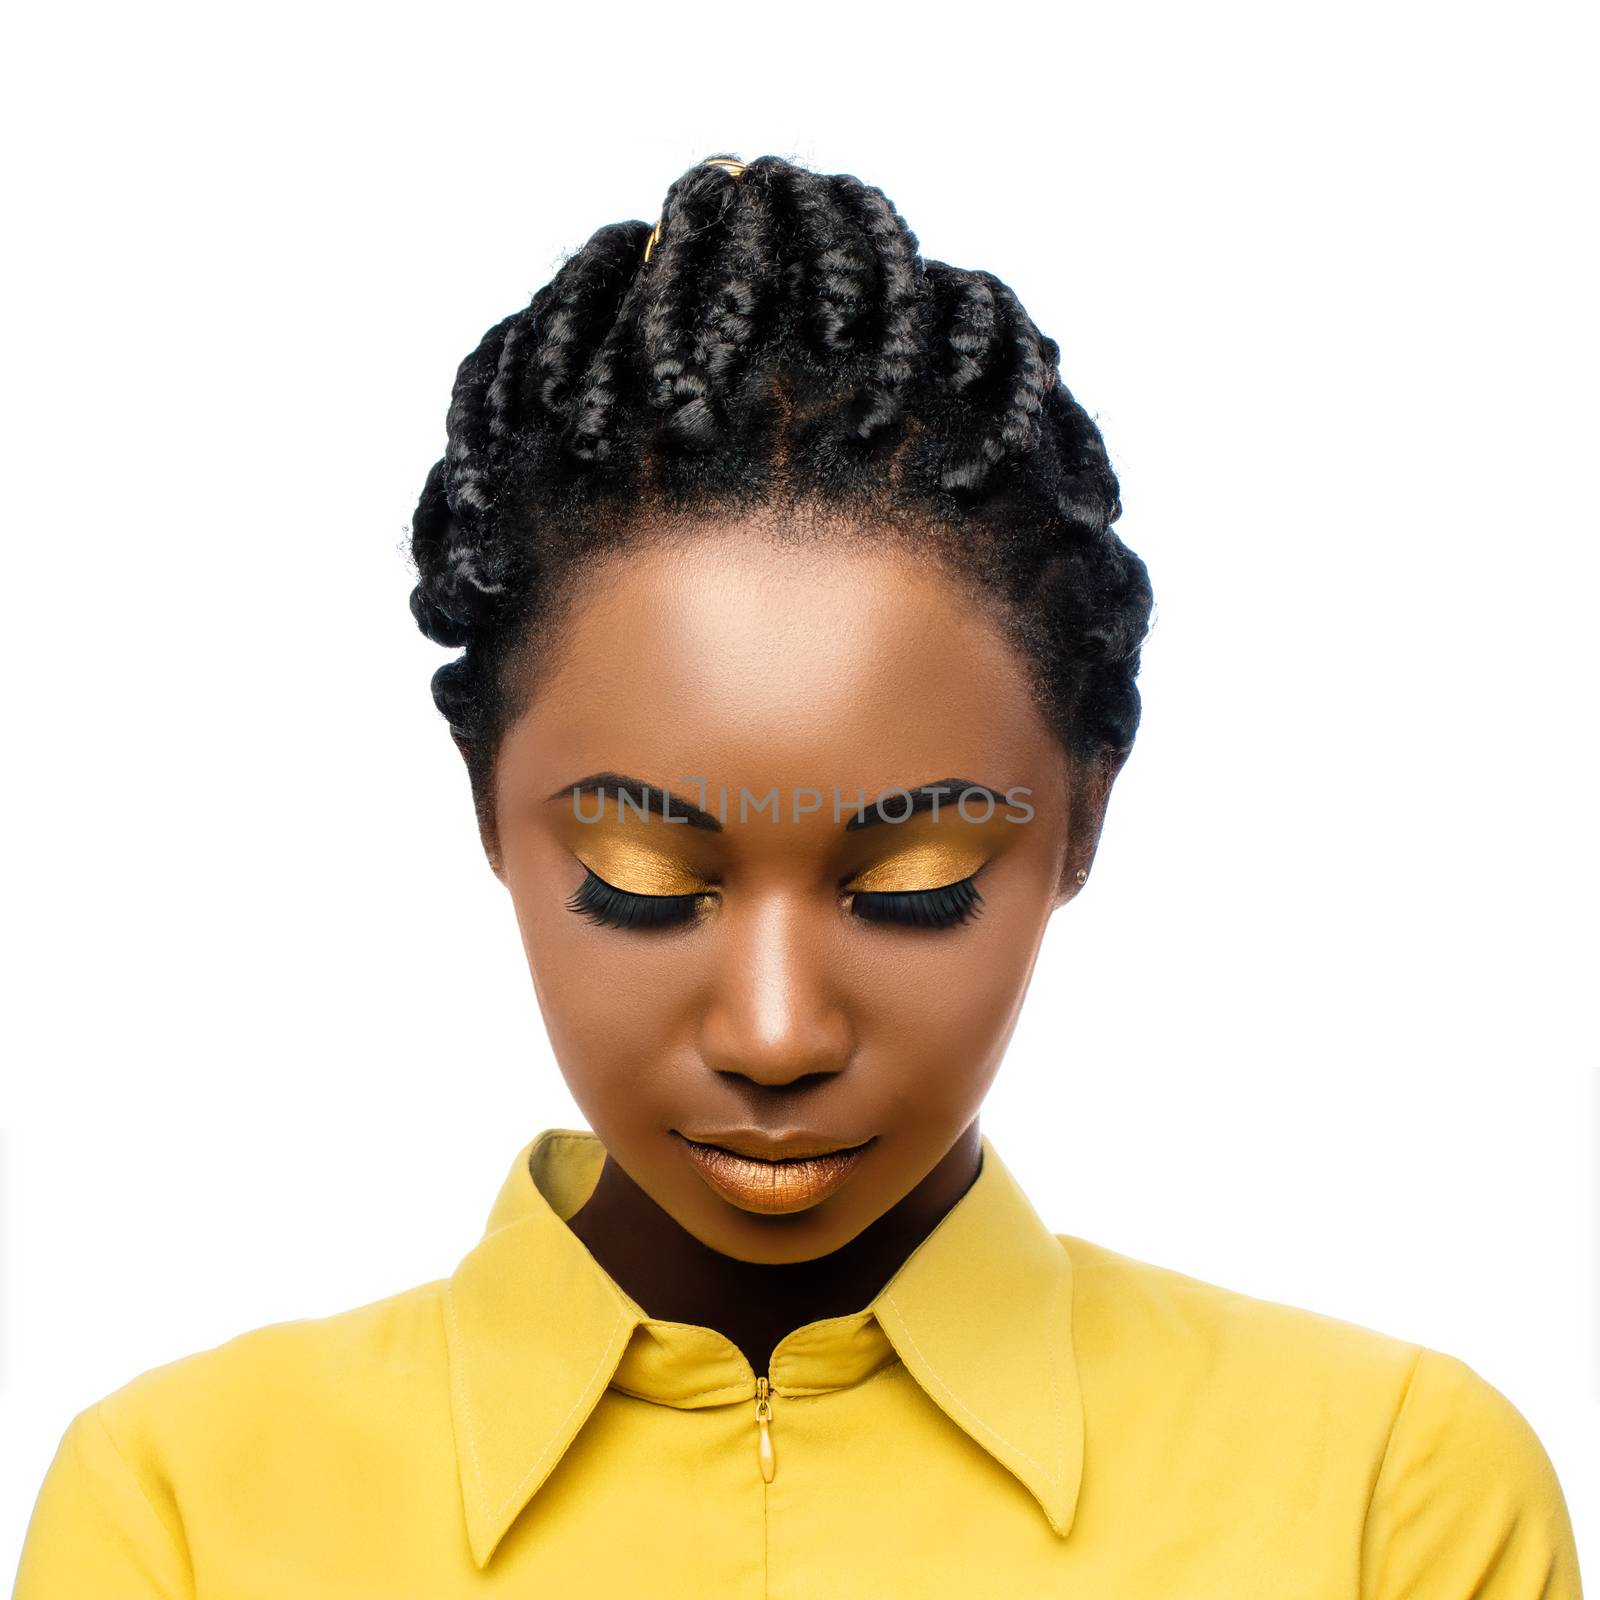 Macro close up beauty portrait of black woman looking down with eyes closed.Girl with stylish braided hairstyle and professional make up isolated on white background.